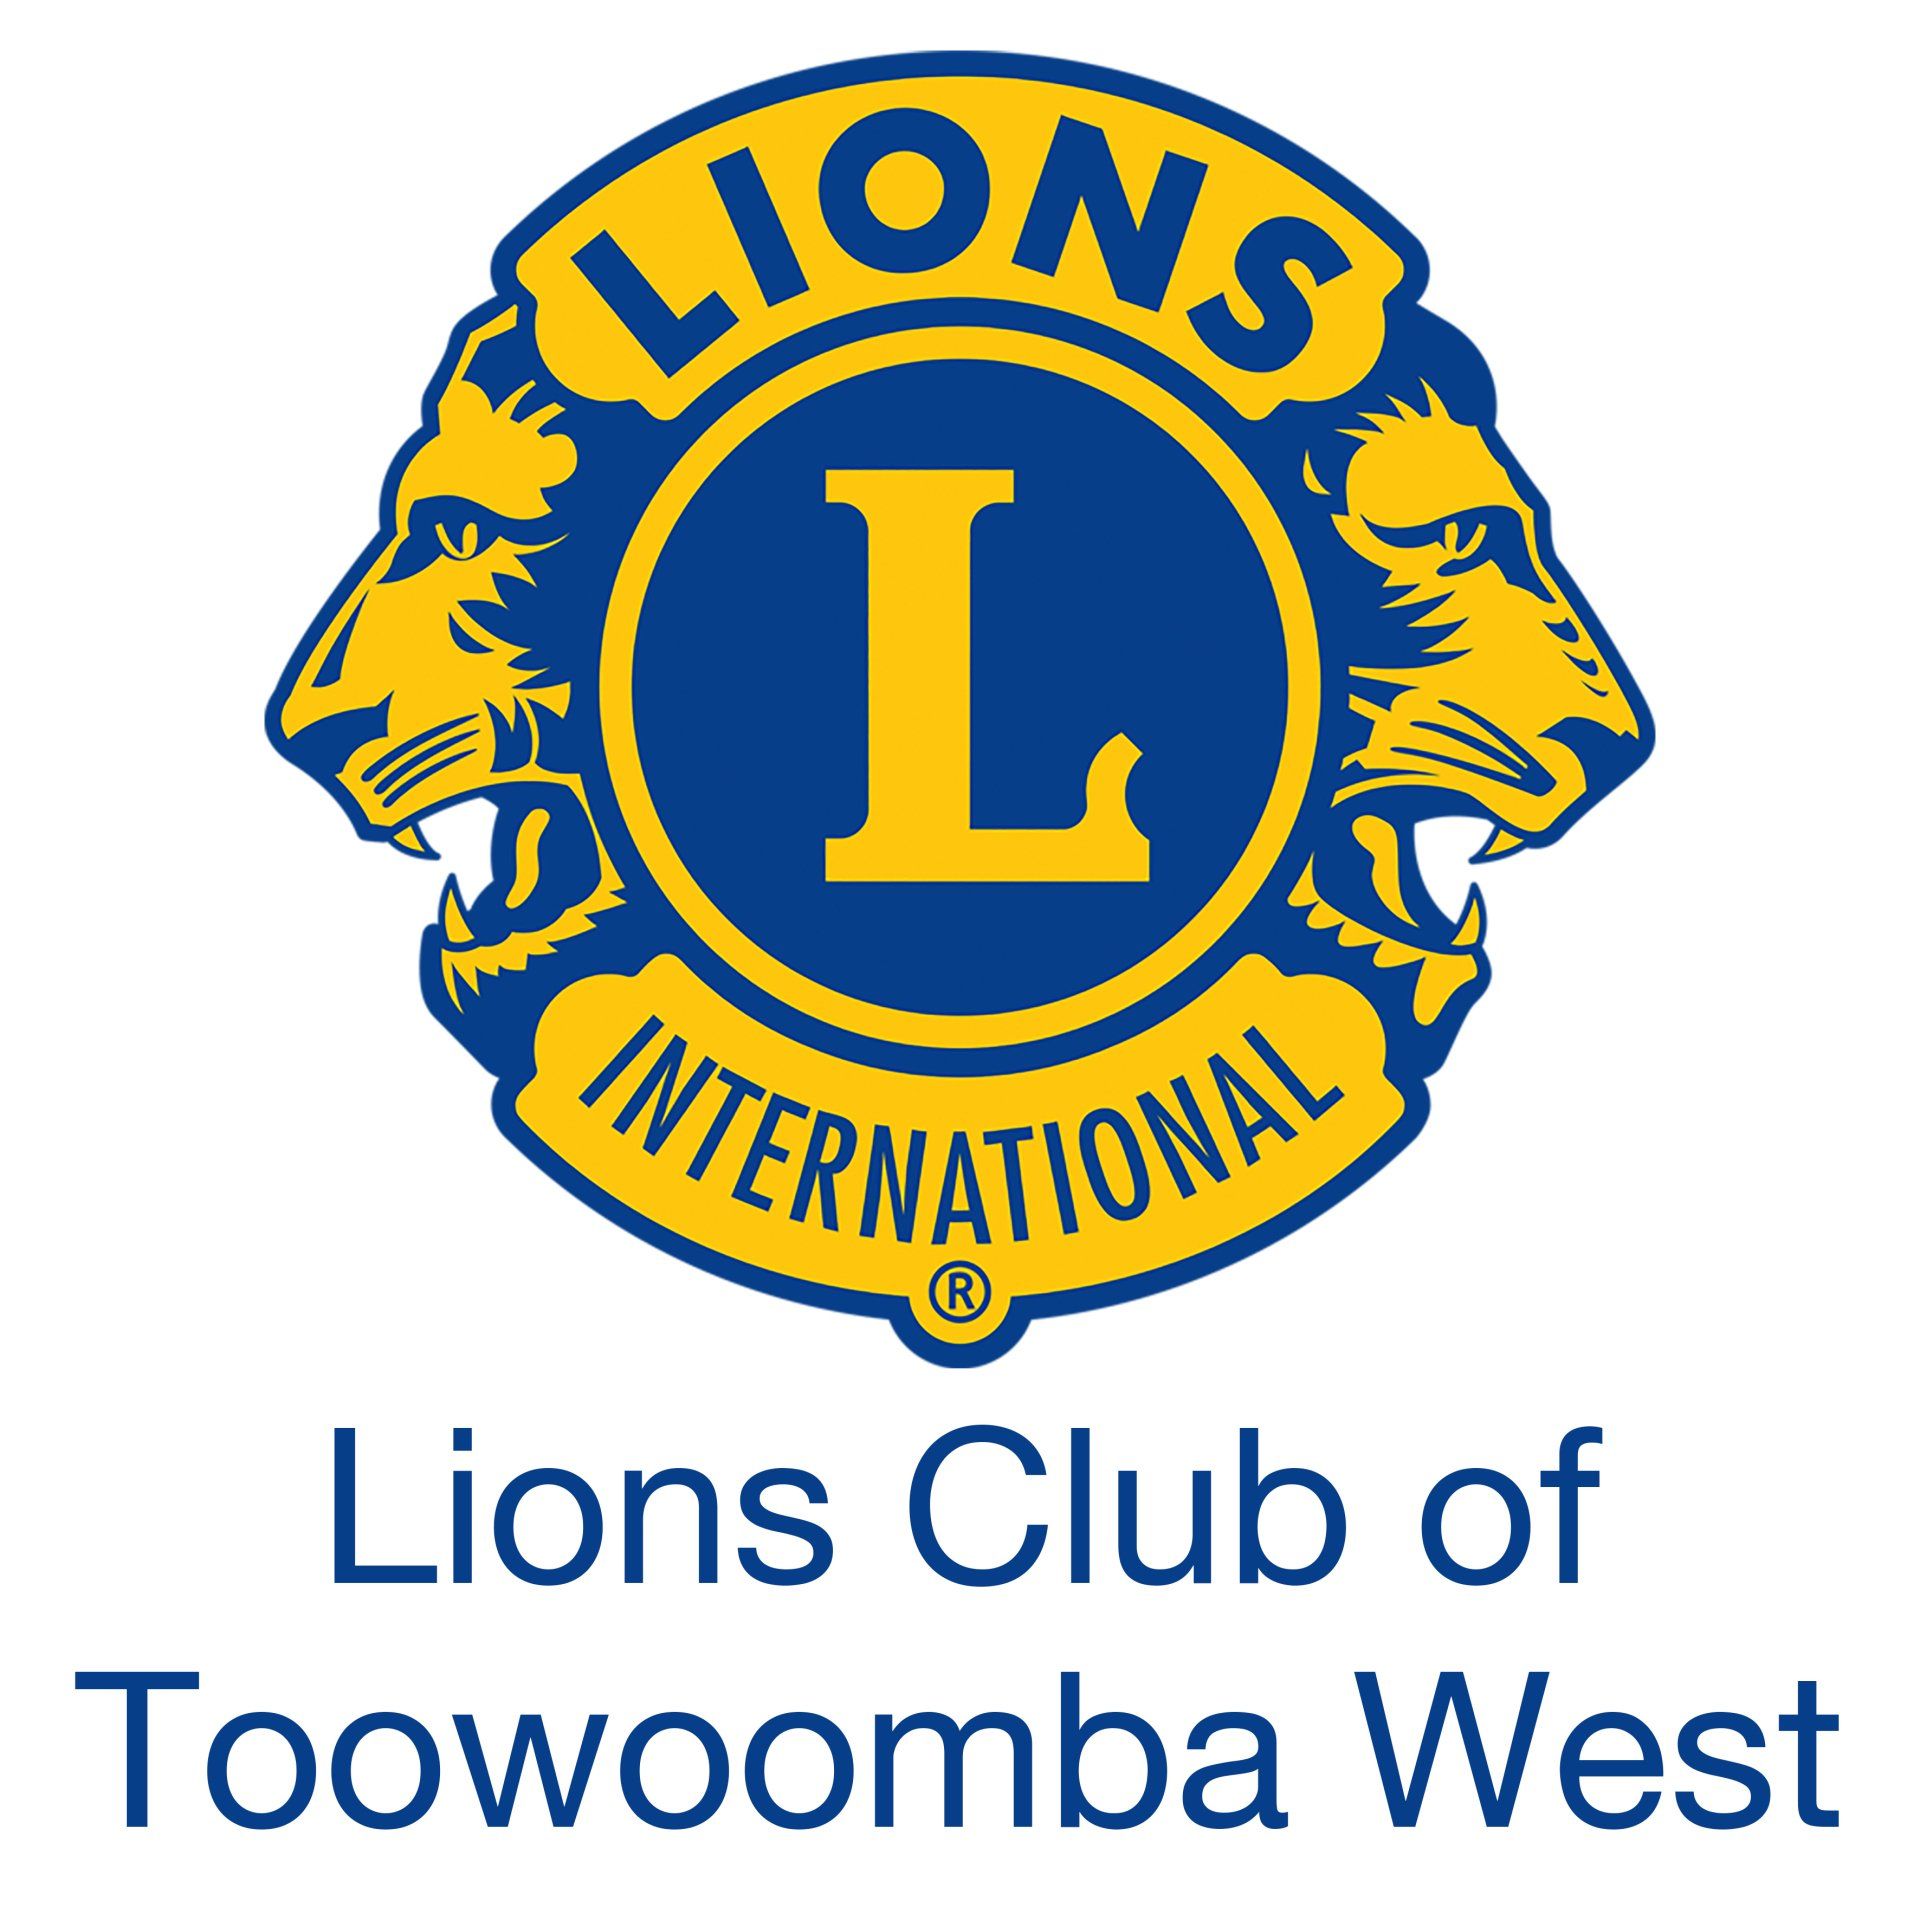 Lions Club of Toowoomba West